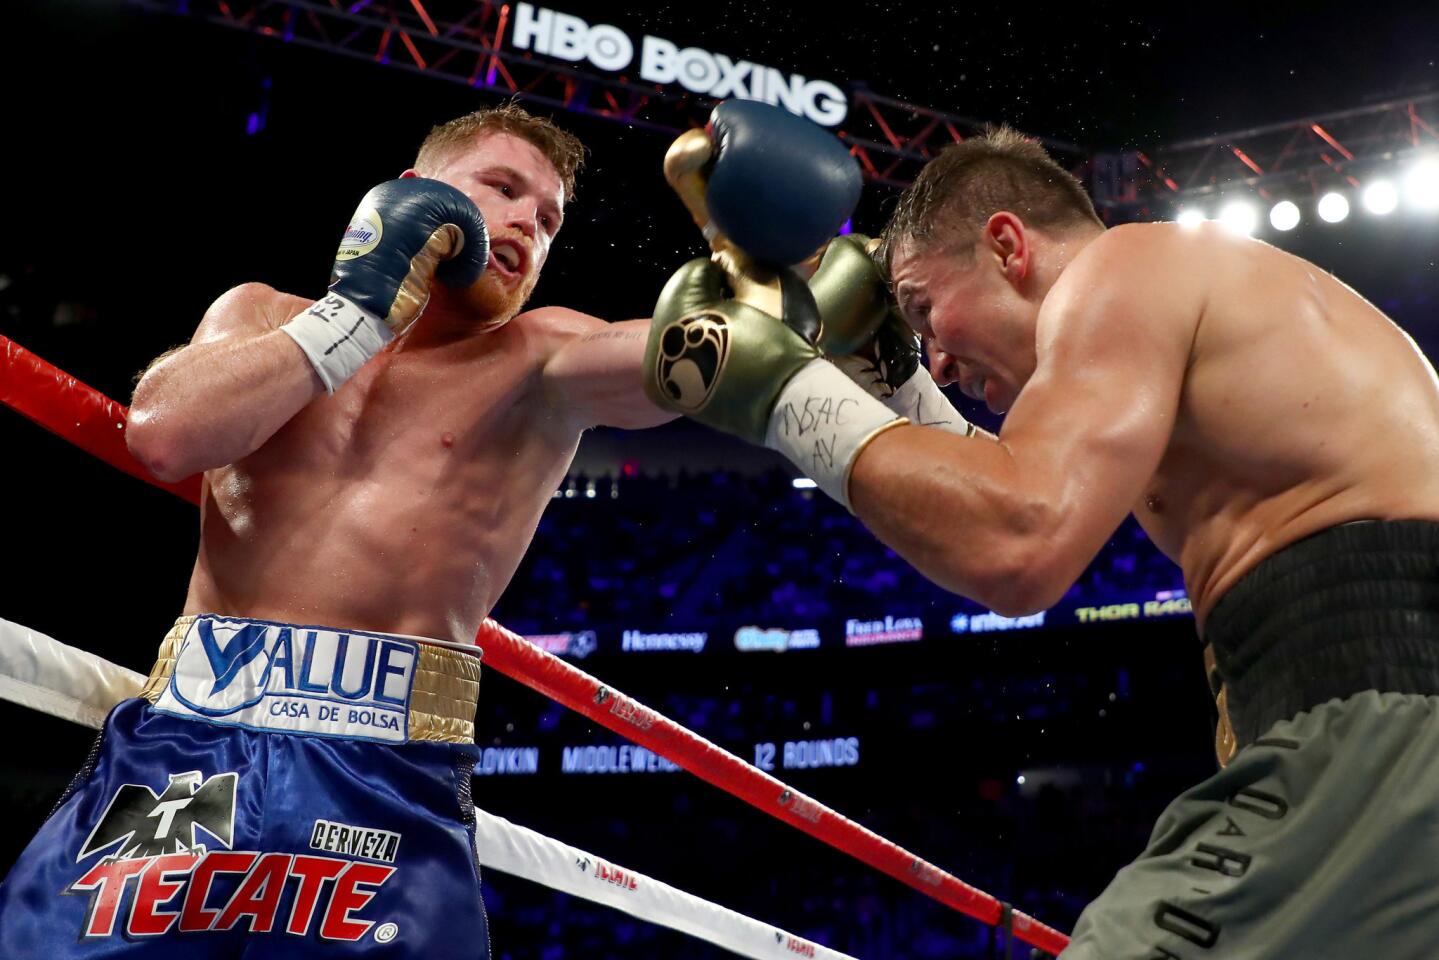 Gennady Golovkin, right, tries to evade a punch by Canelo Alvarez during their middleweight championionship bout.